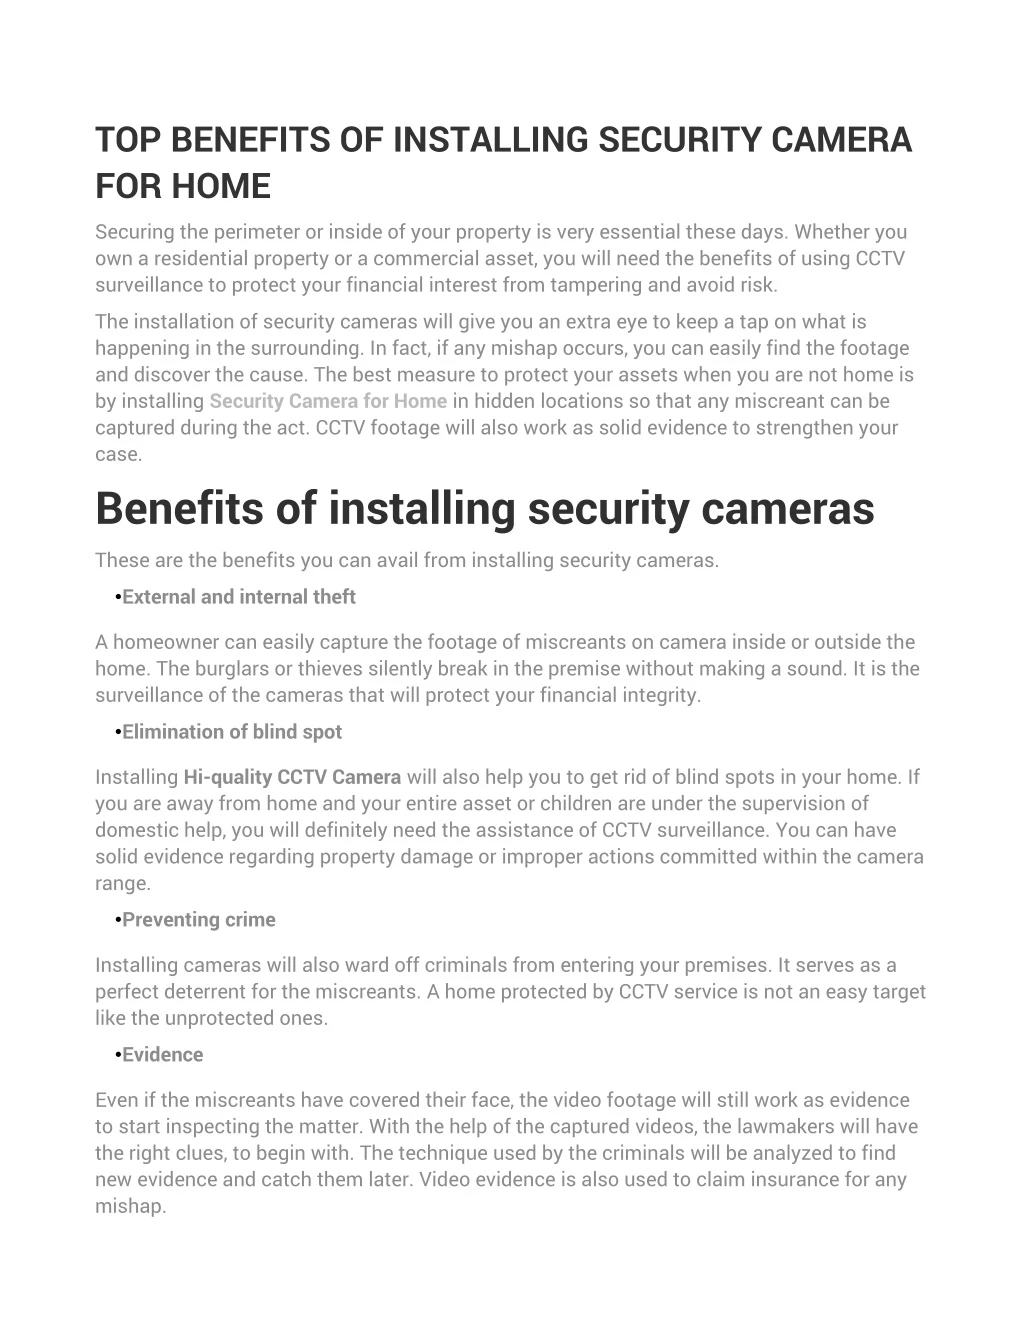 TOP BENEFITS OF INSTALLING SECURITY CAMERA FOR HOME